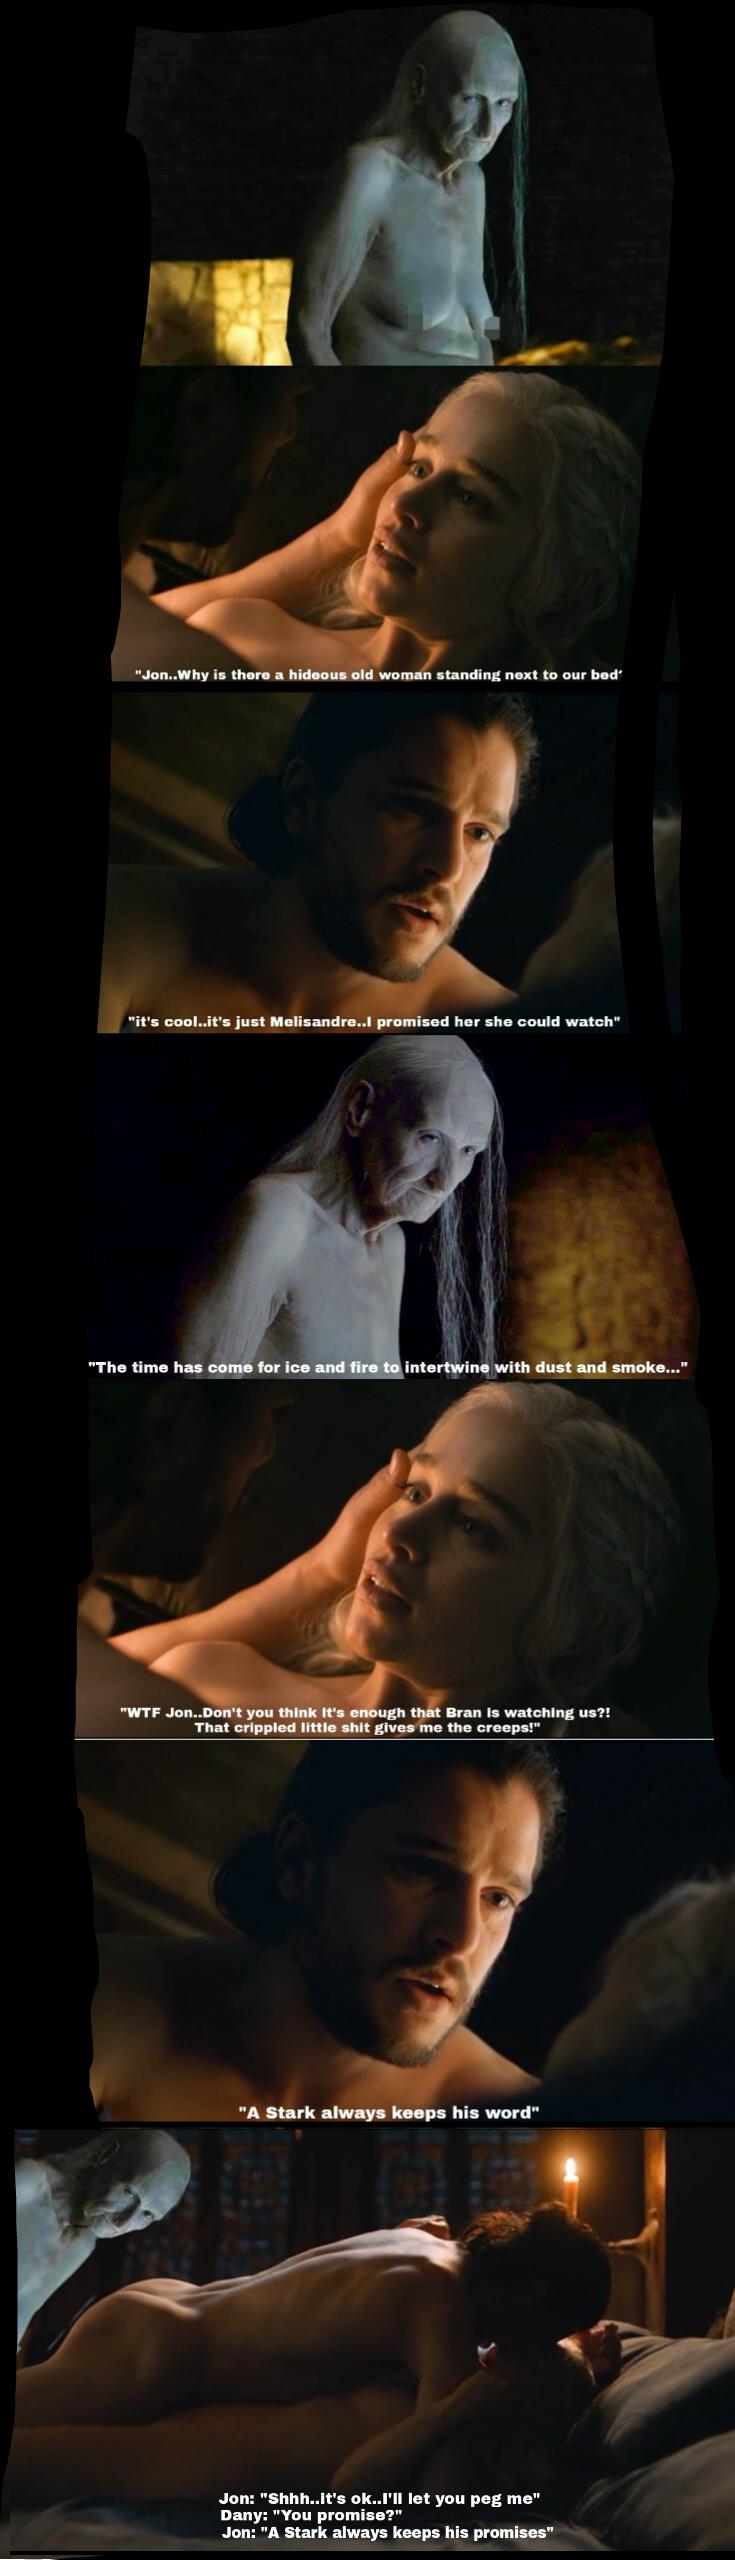 Deleted Scene From #BOATSEX